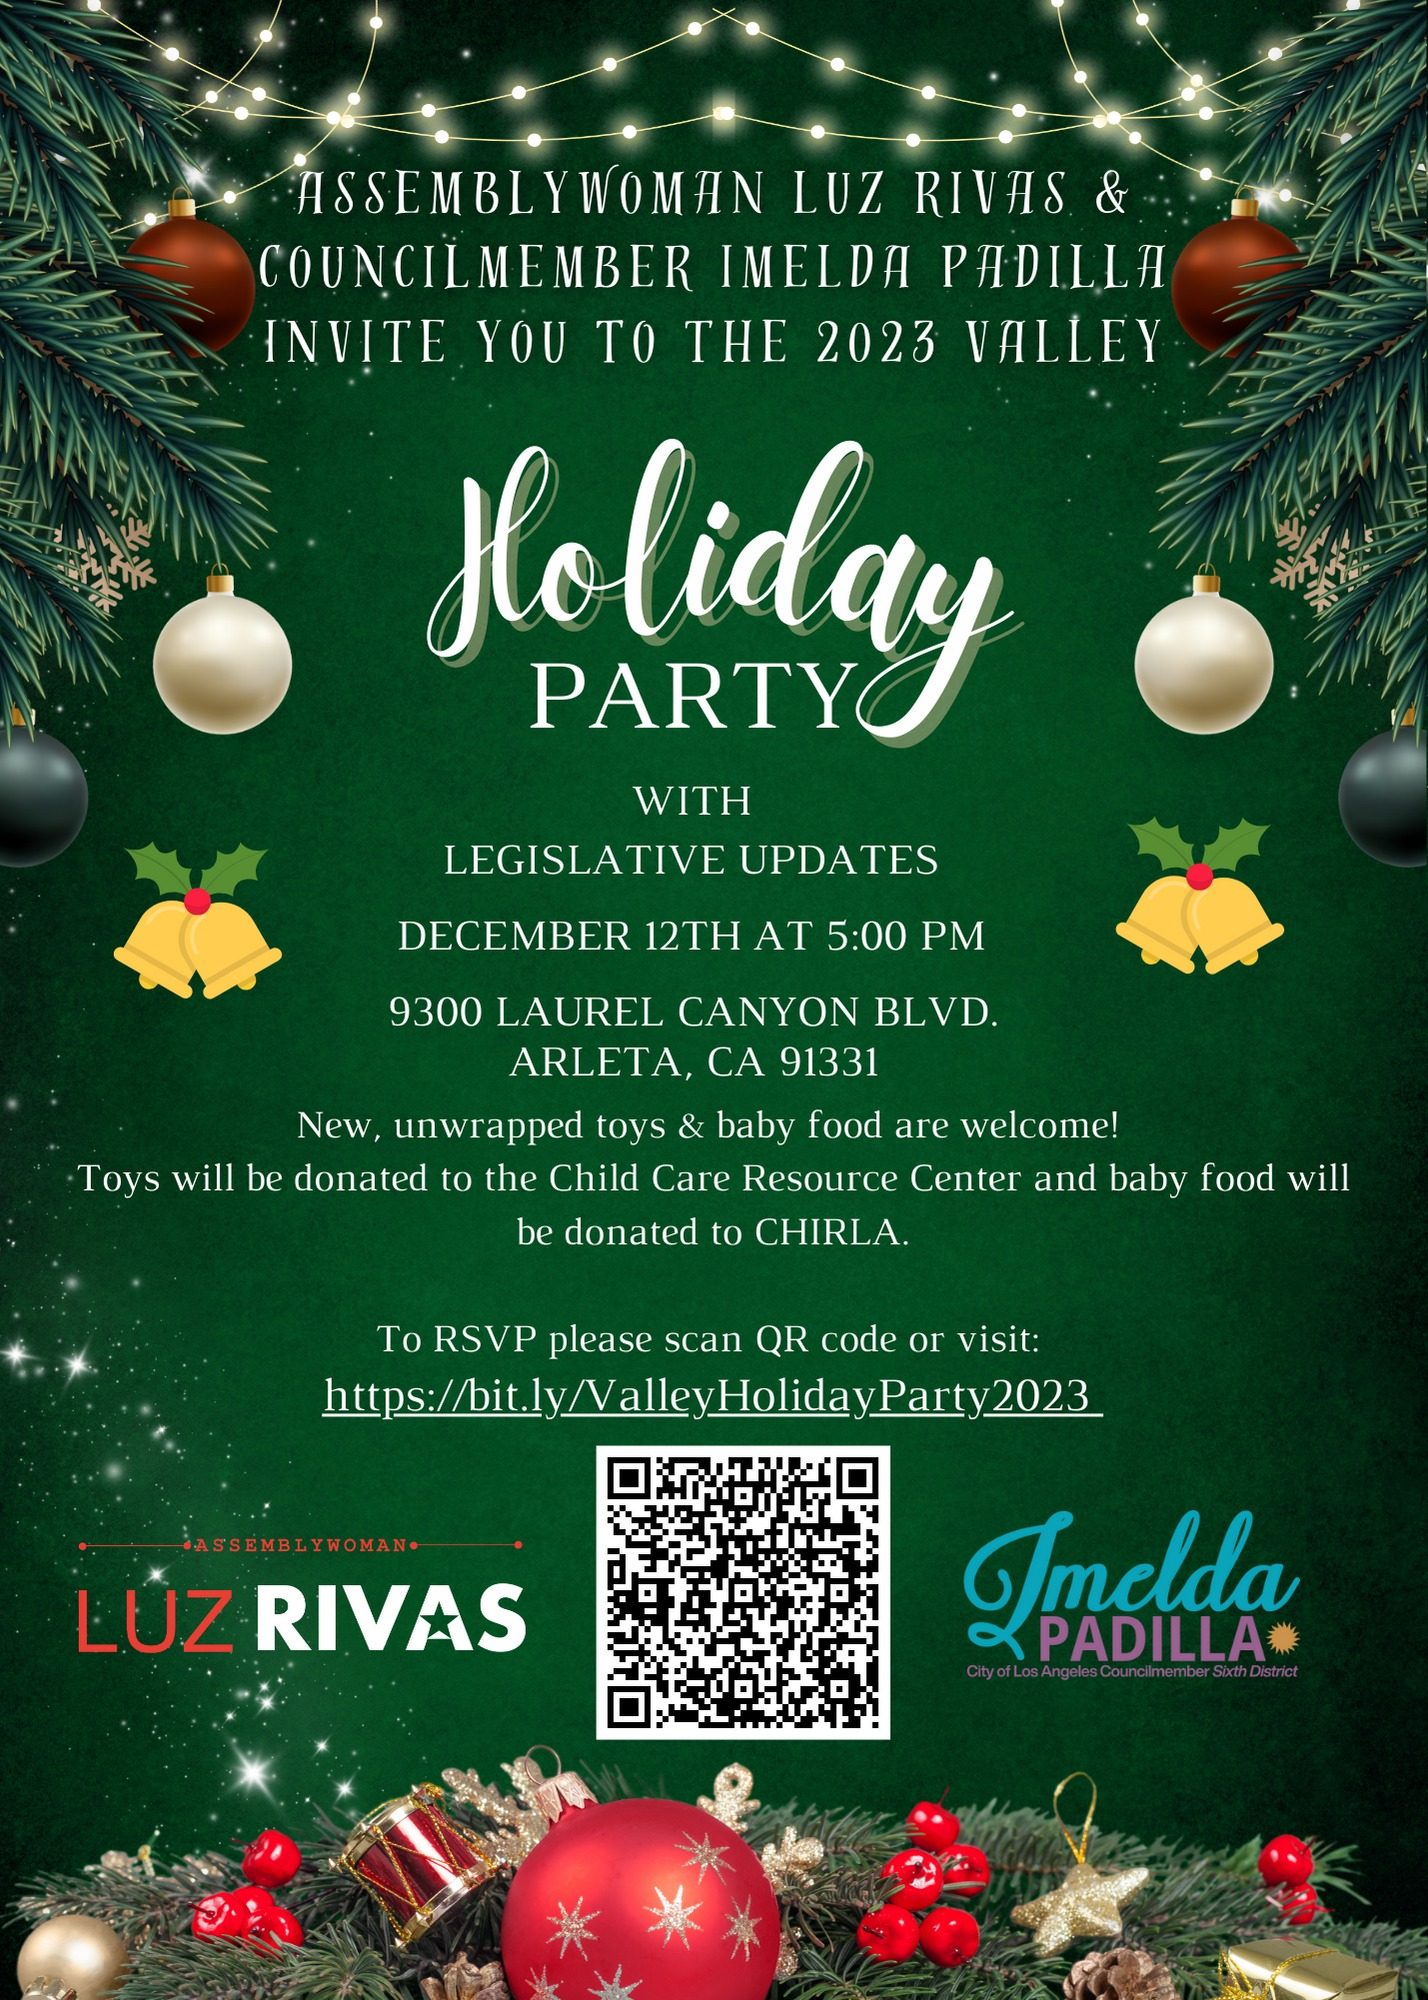 2023 Valley Holiday Party and Toy Drive